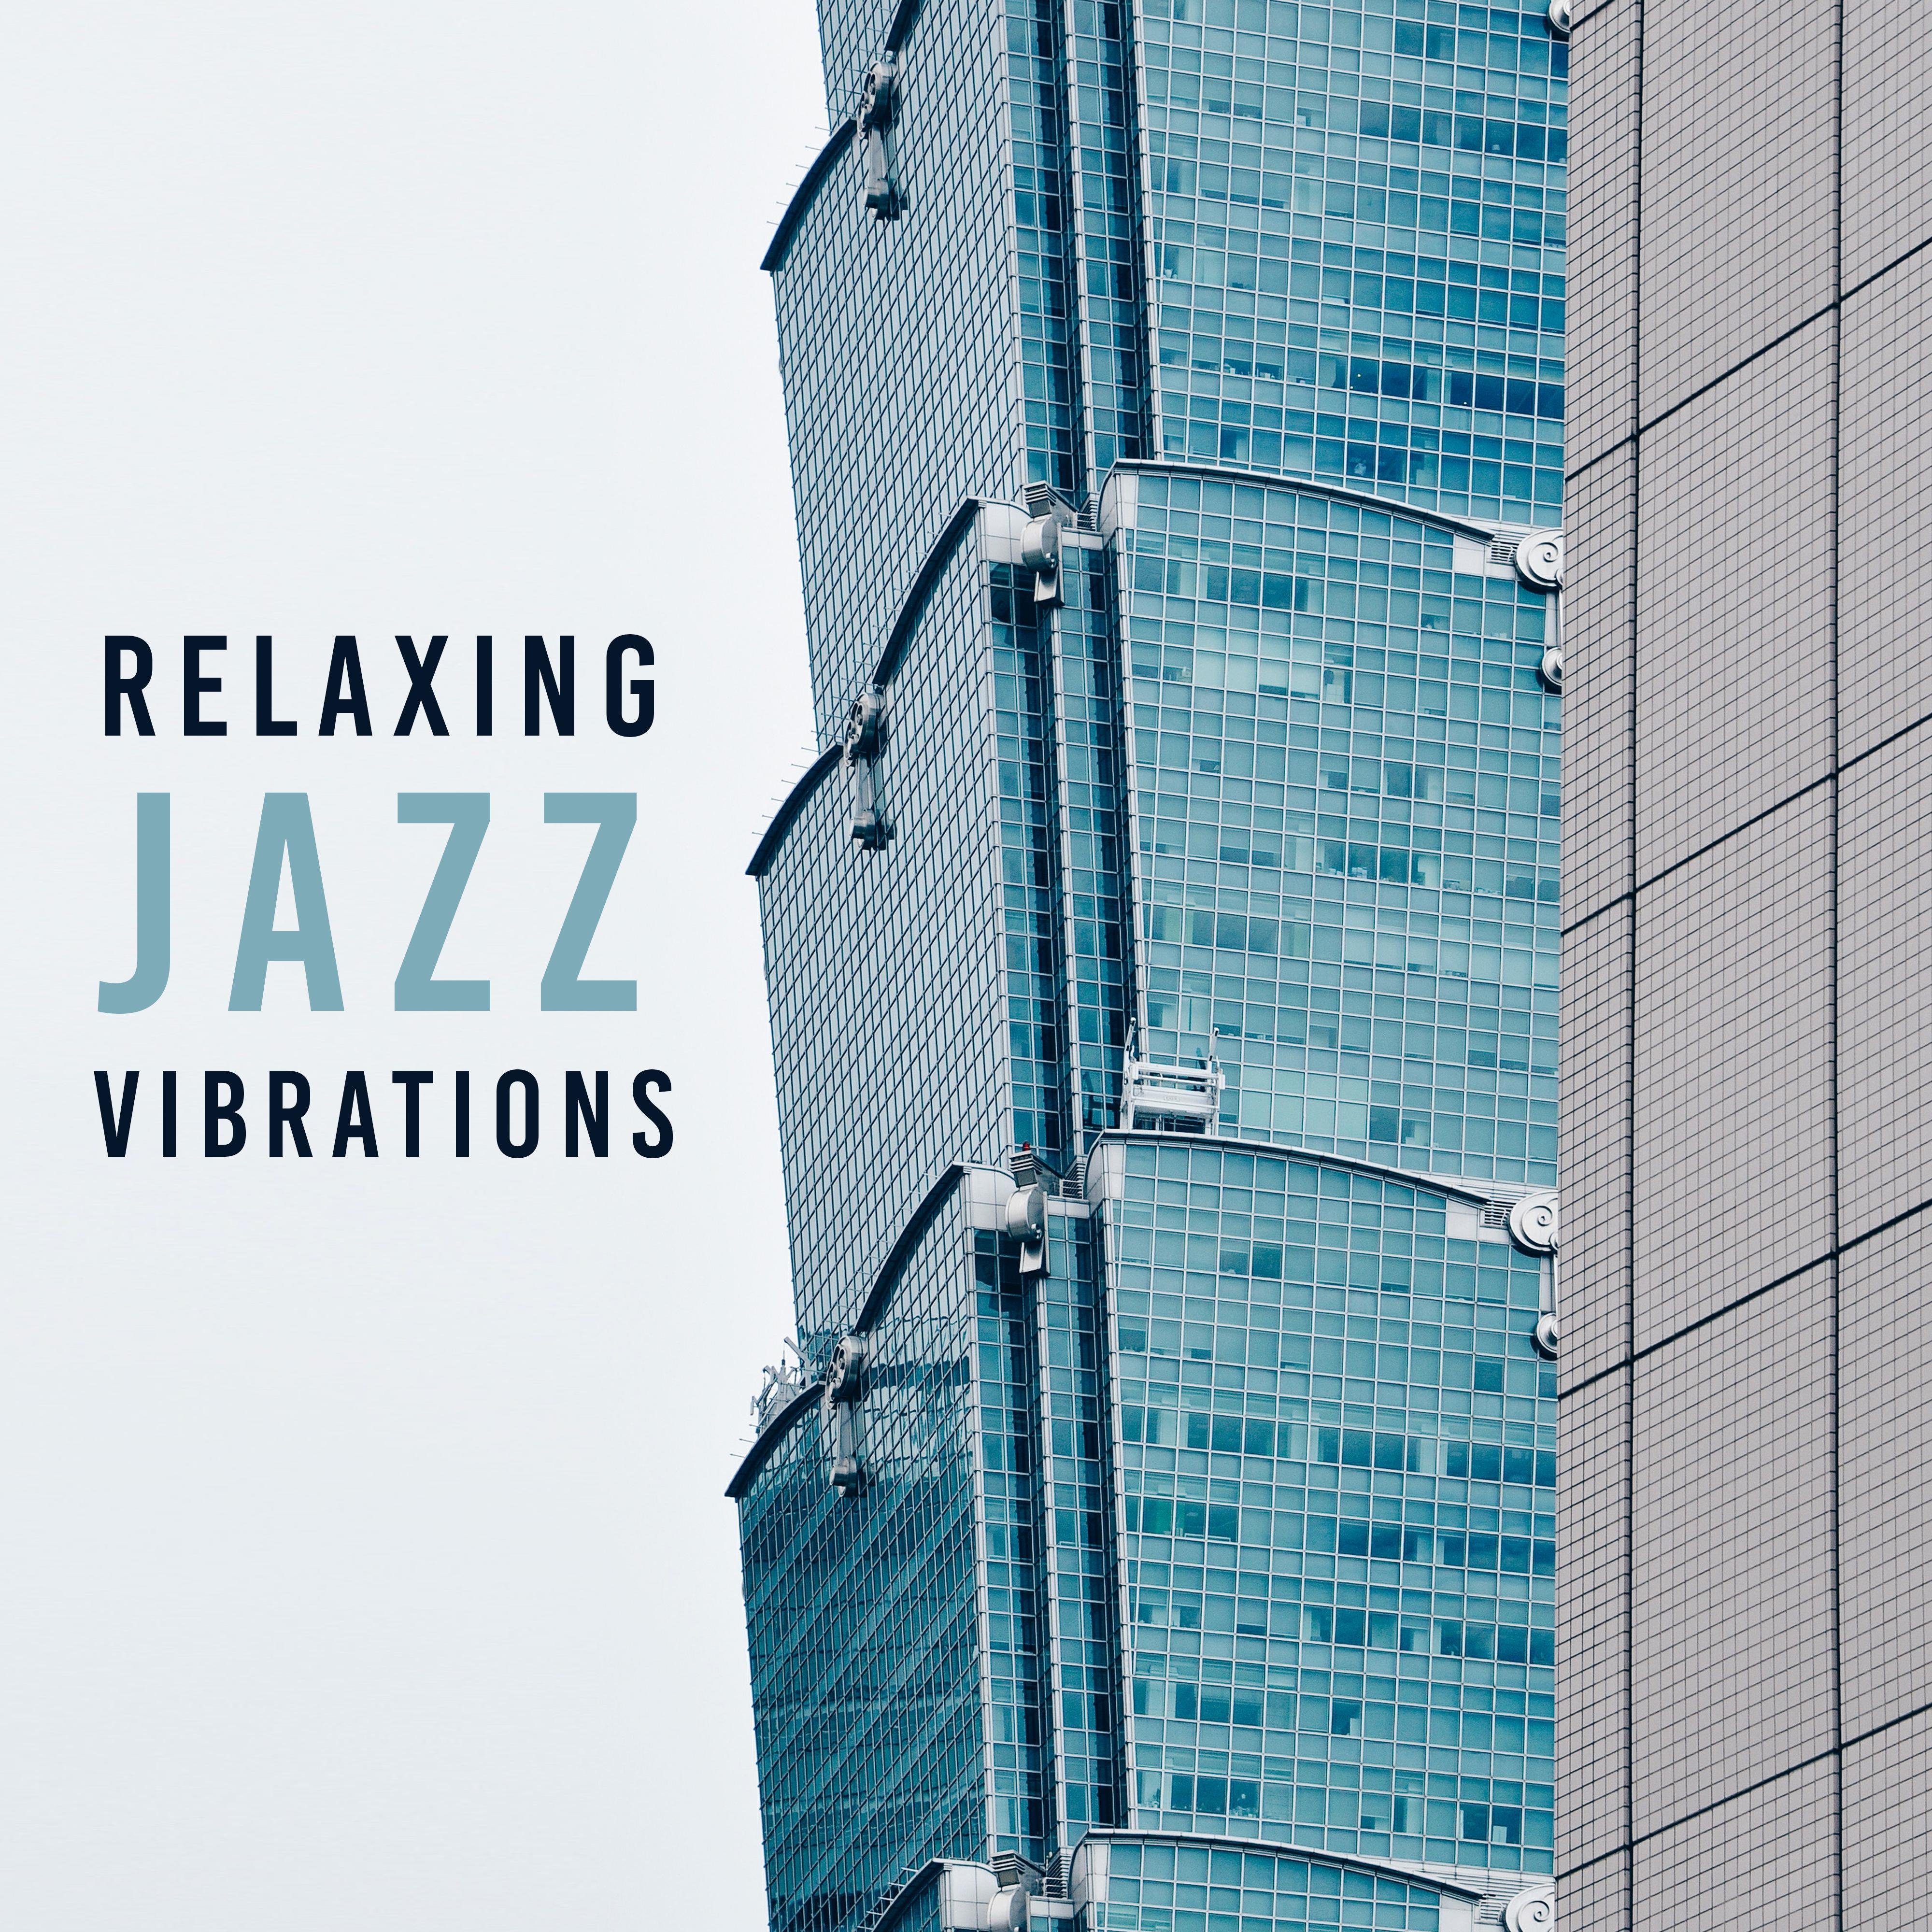 Relaxing Jazz Vibrations